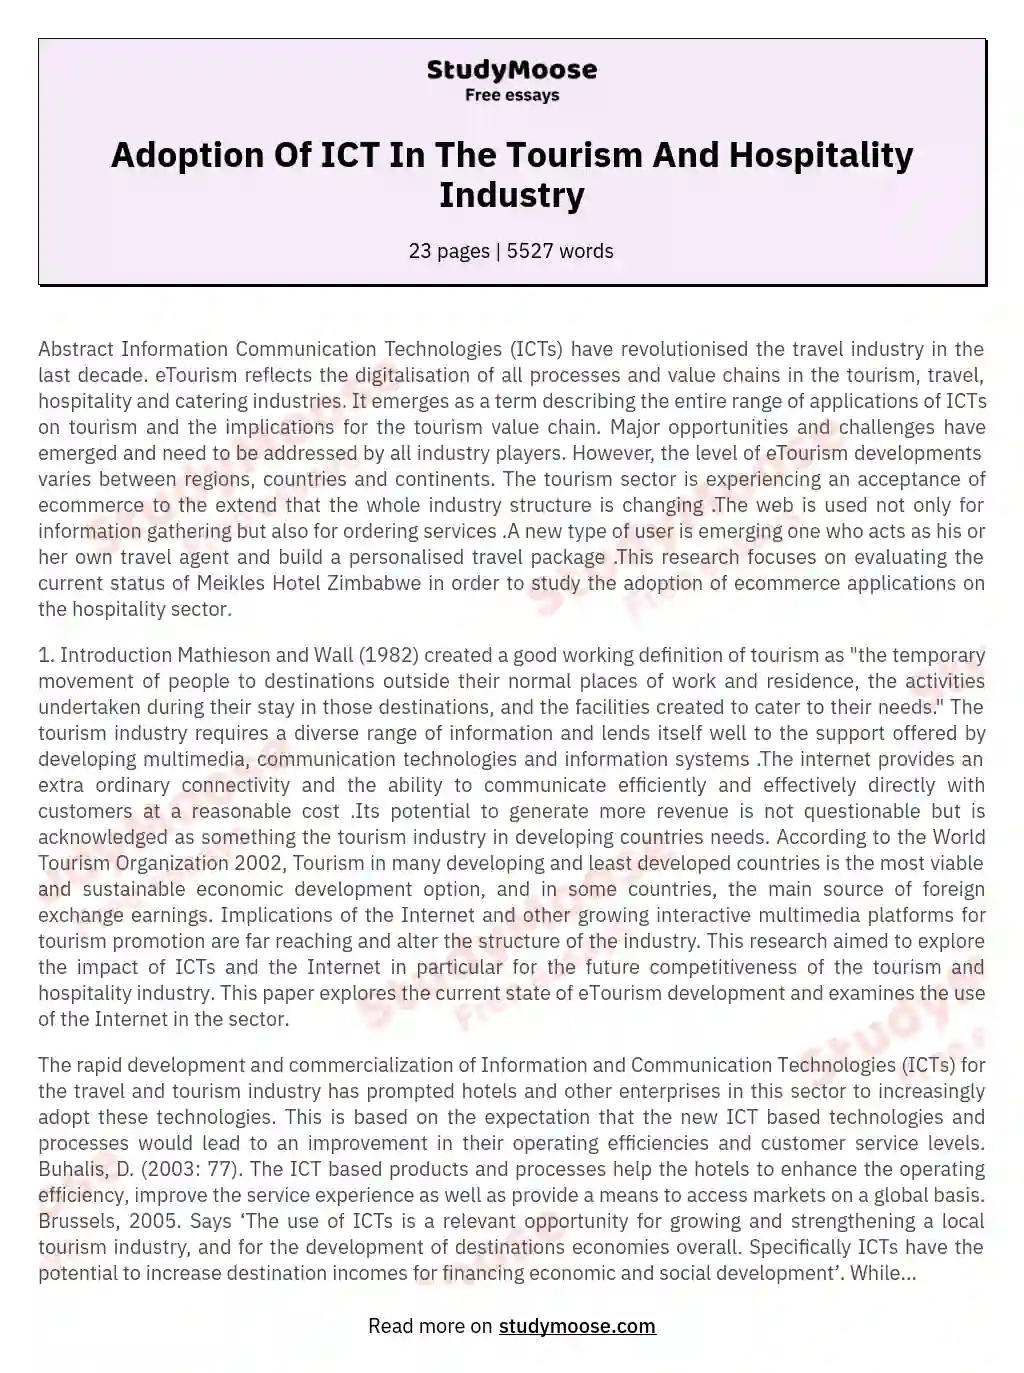 Adoption Of ICT In The Tourism And Hospitality Industry essay